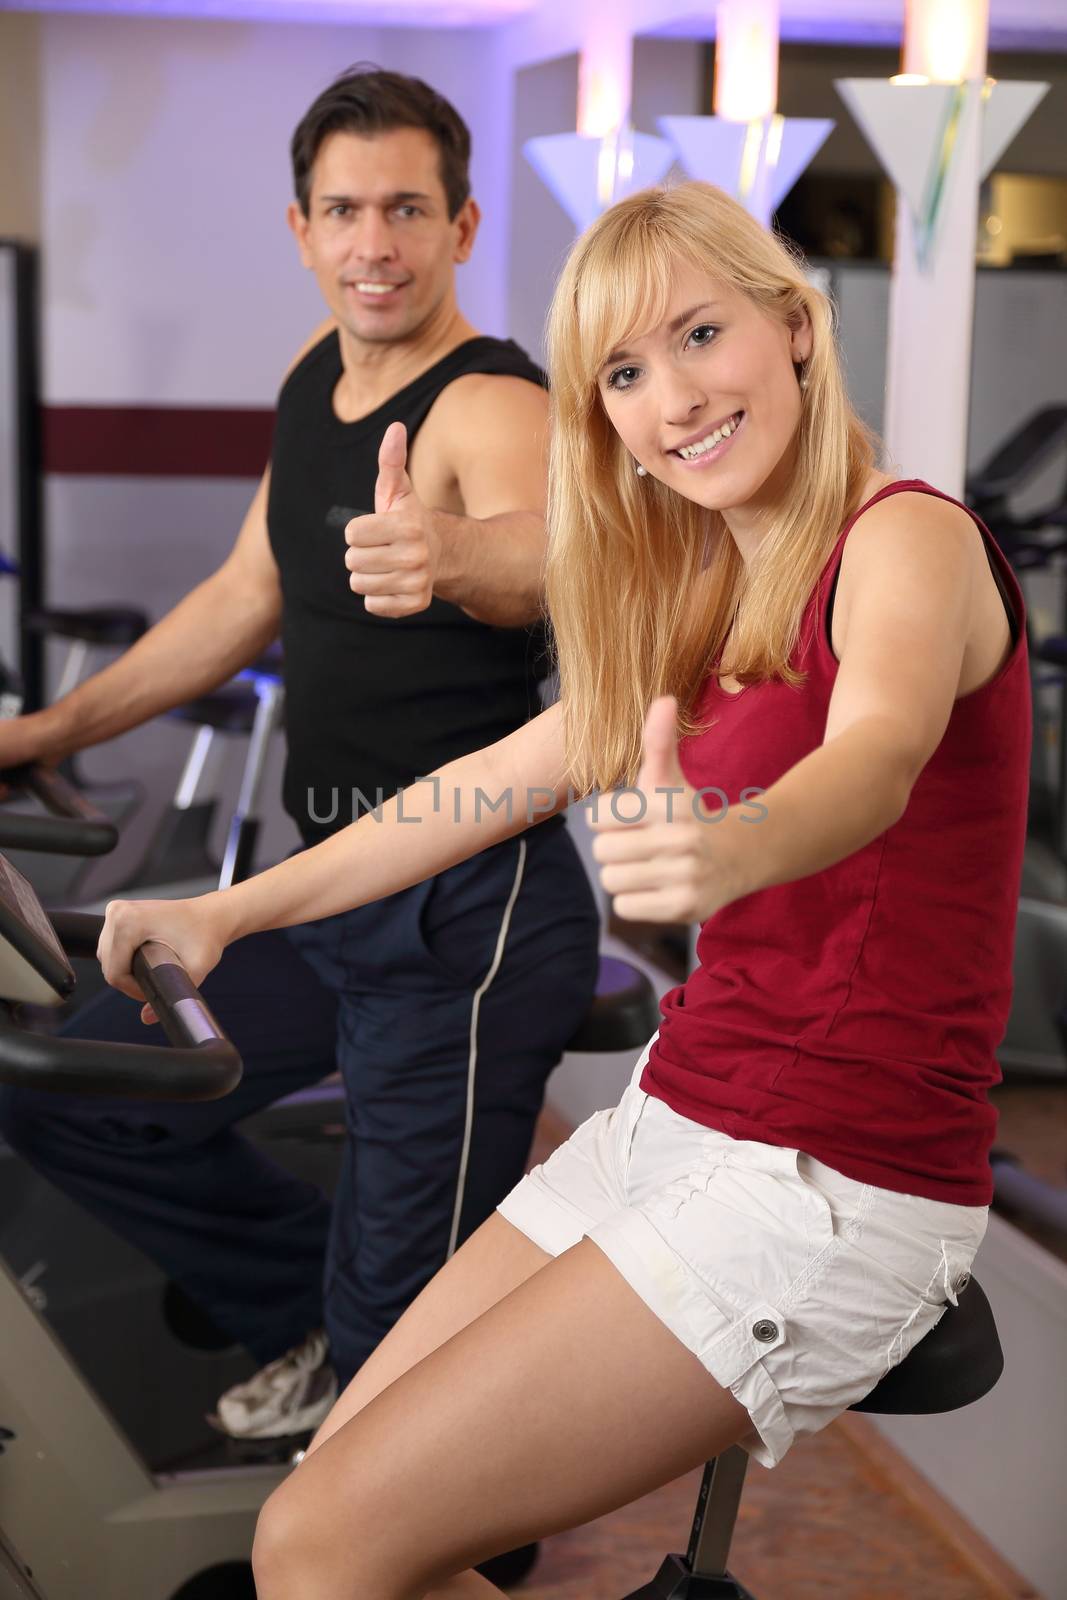 Attractive woman and a man cycling in a gym by ikonoklast_fotografie